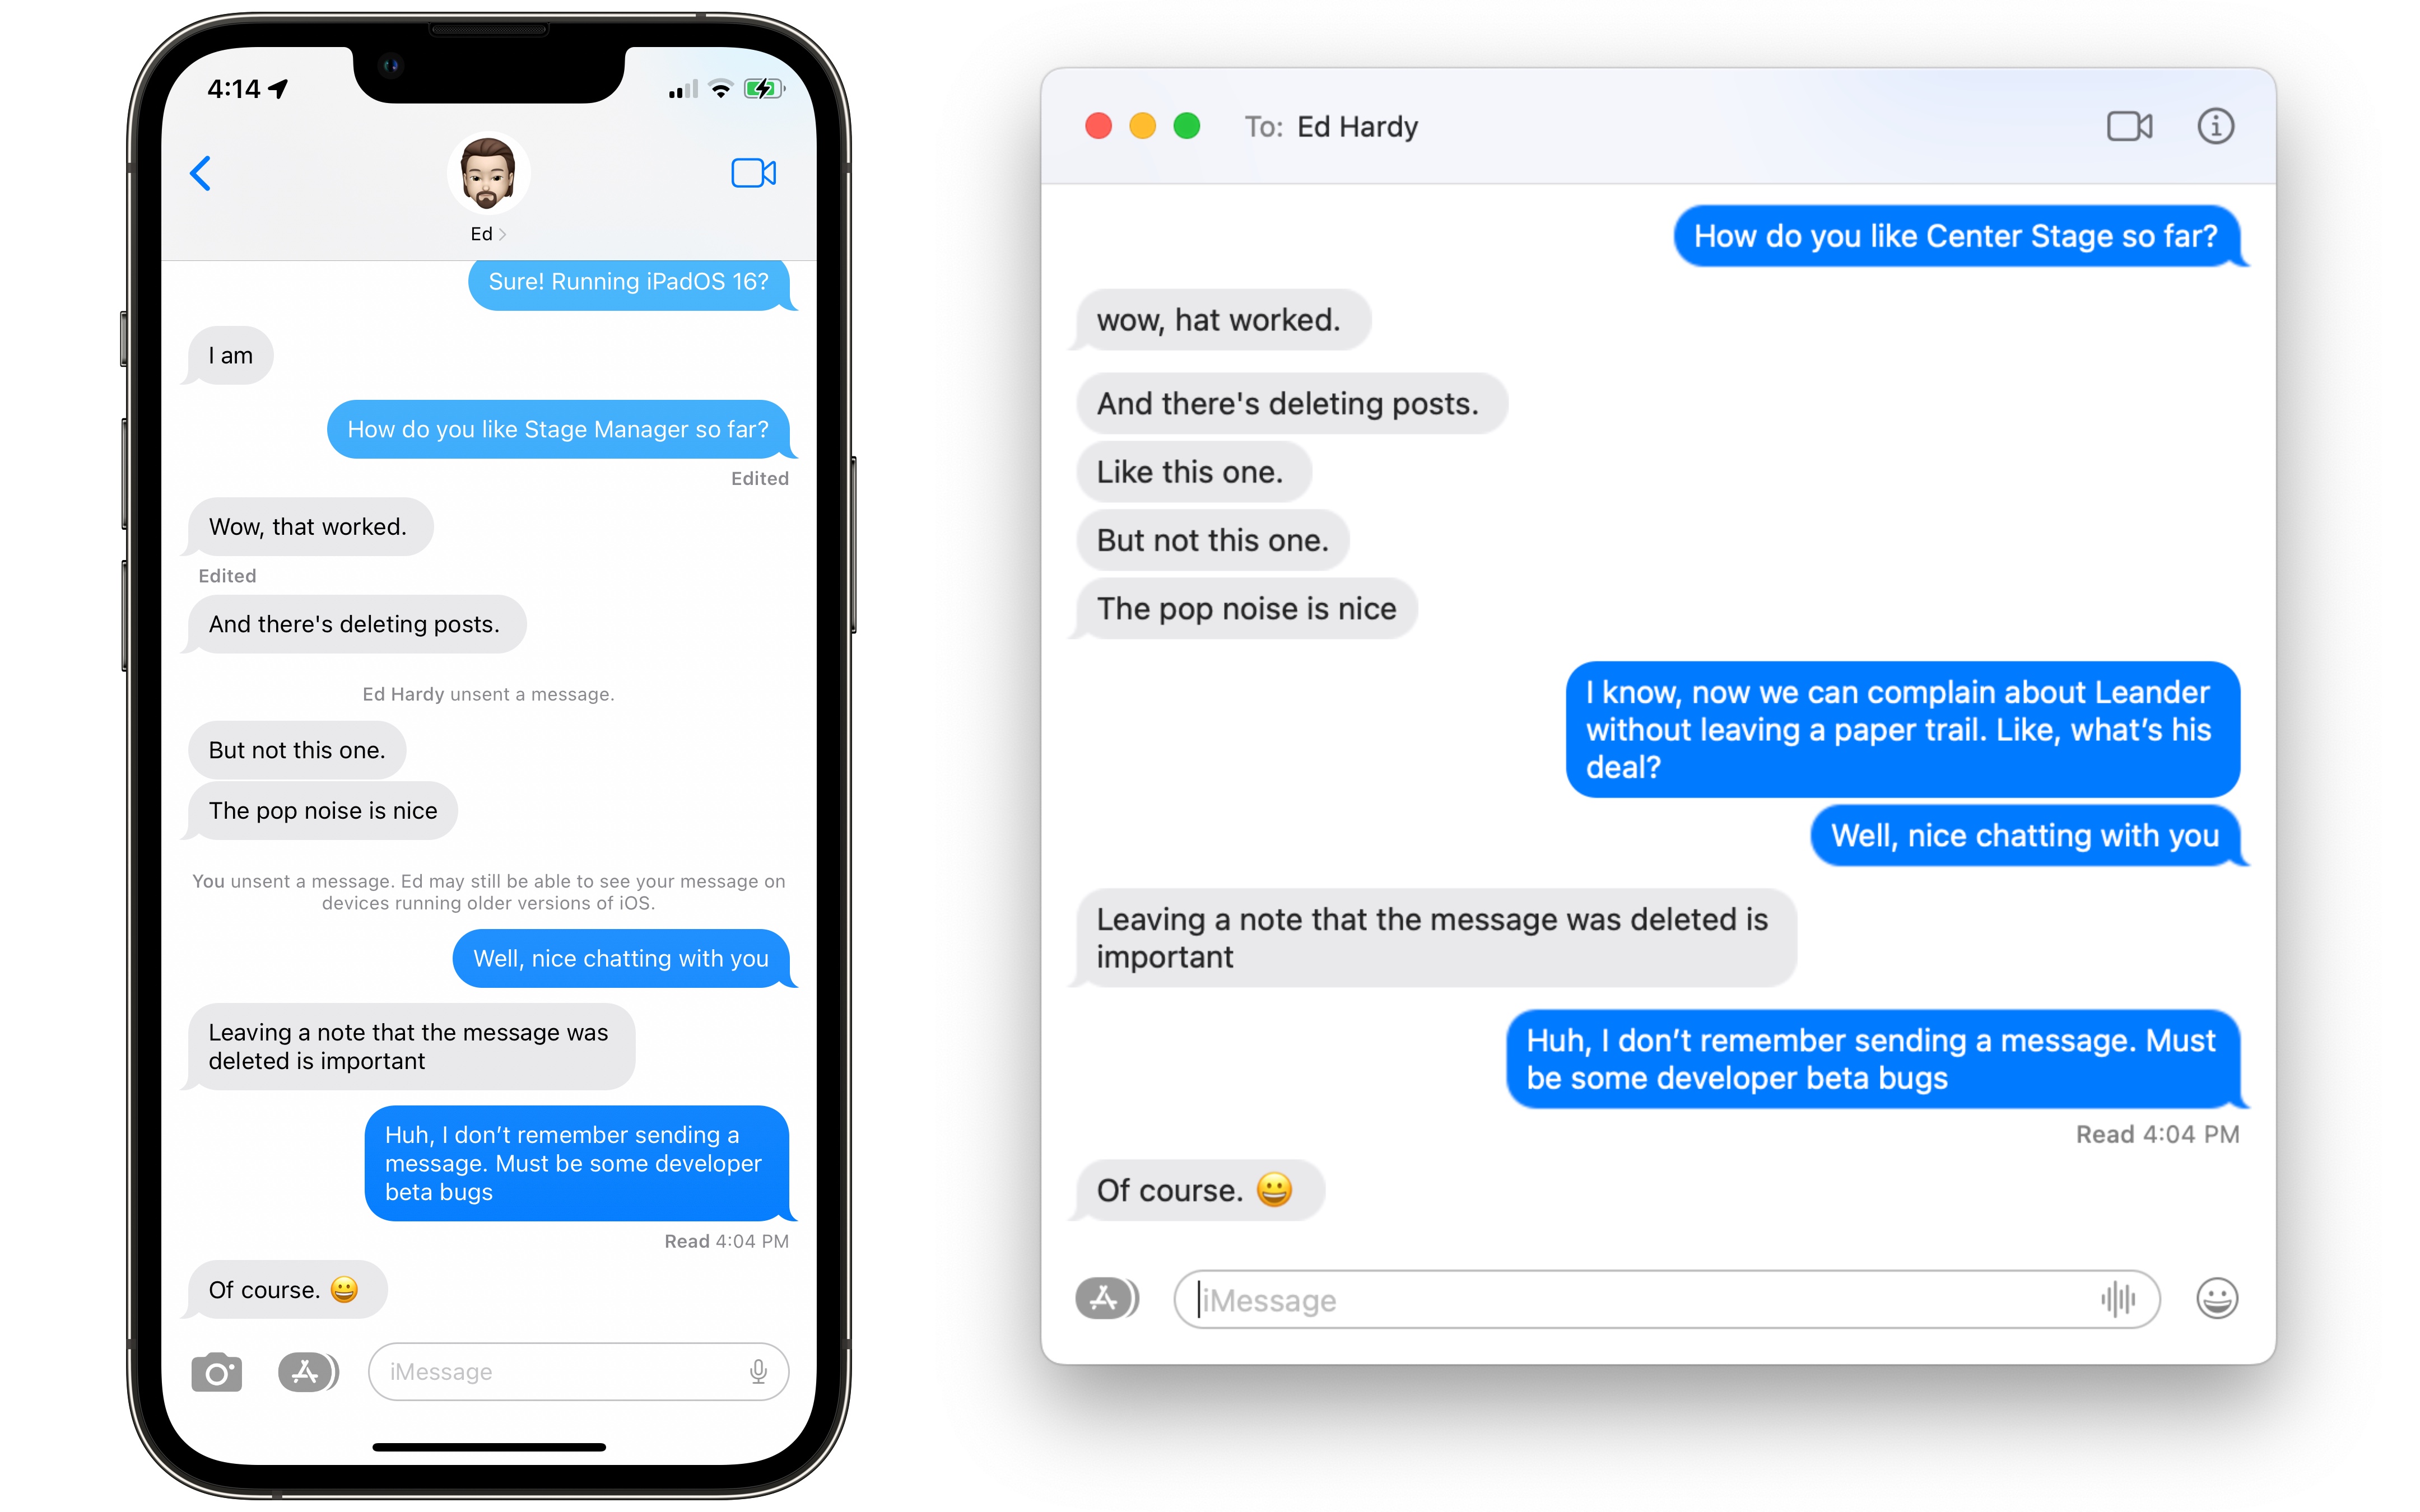 Messages appear as originally sent on older versions of iOS and macOS.